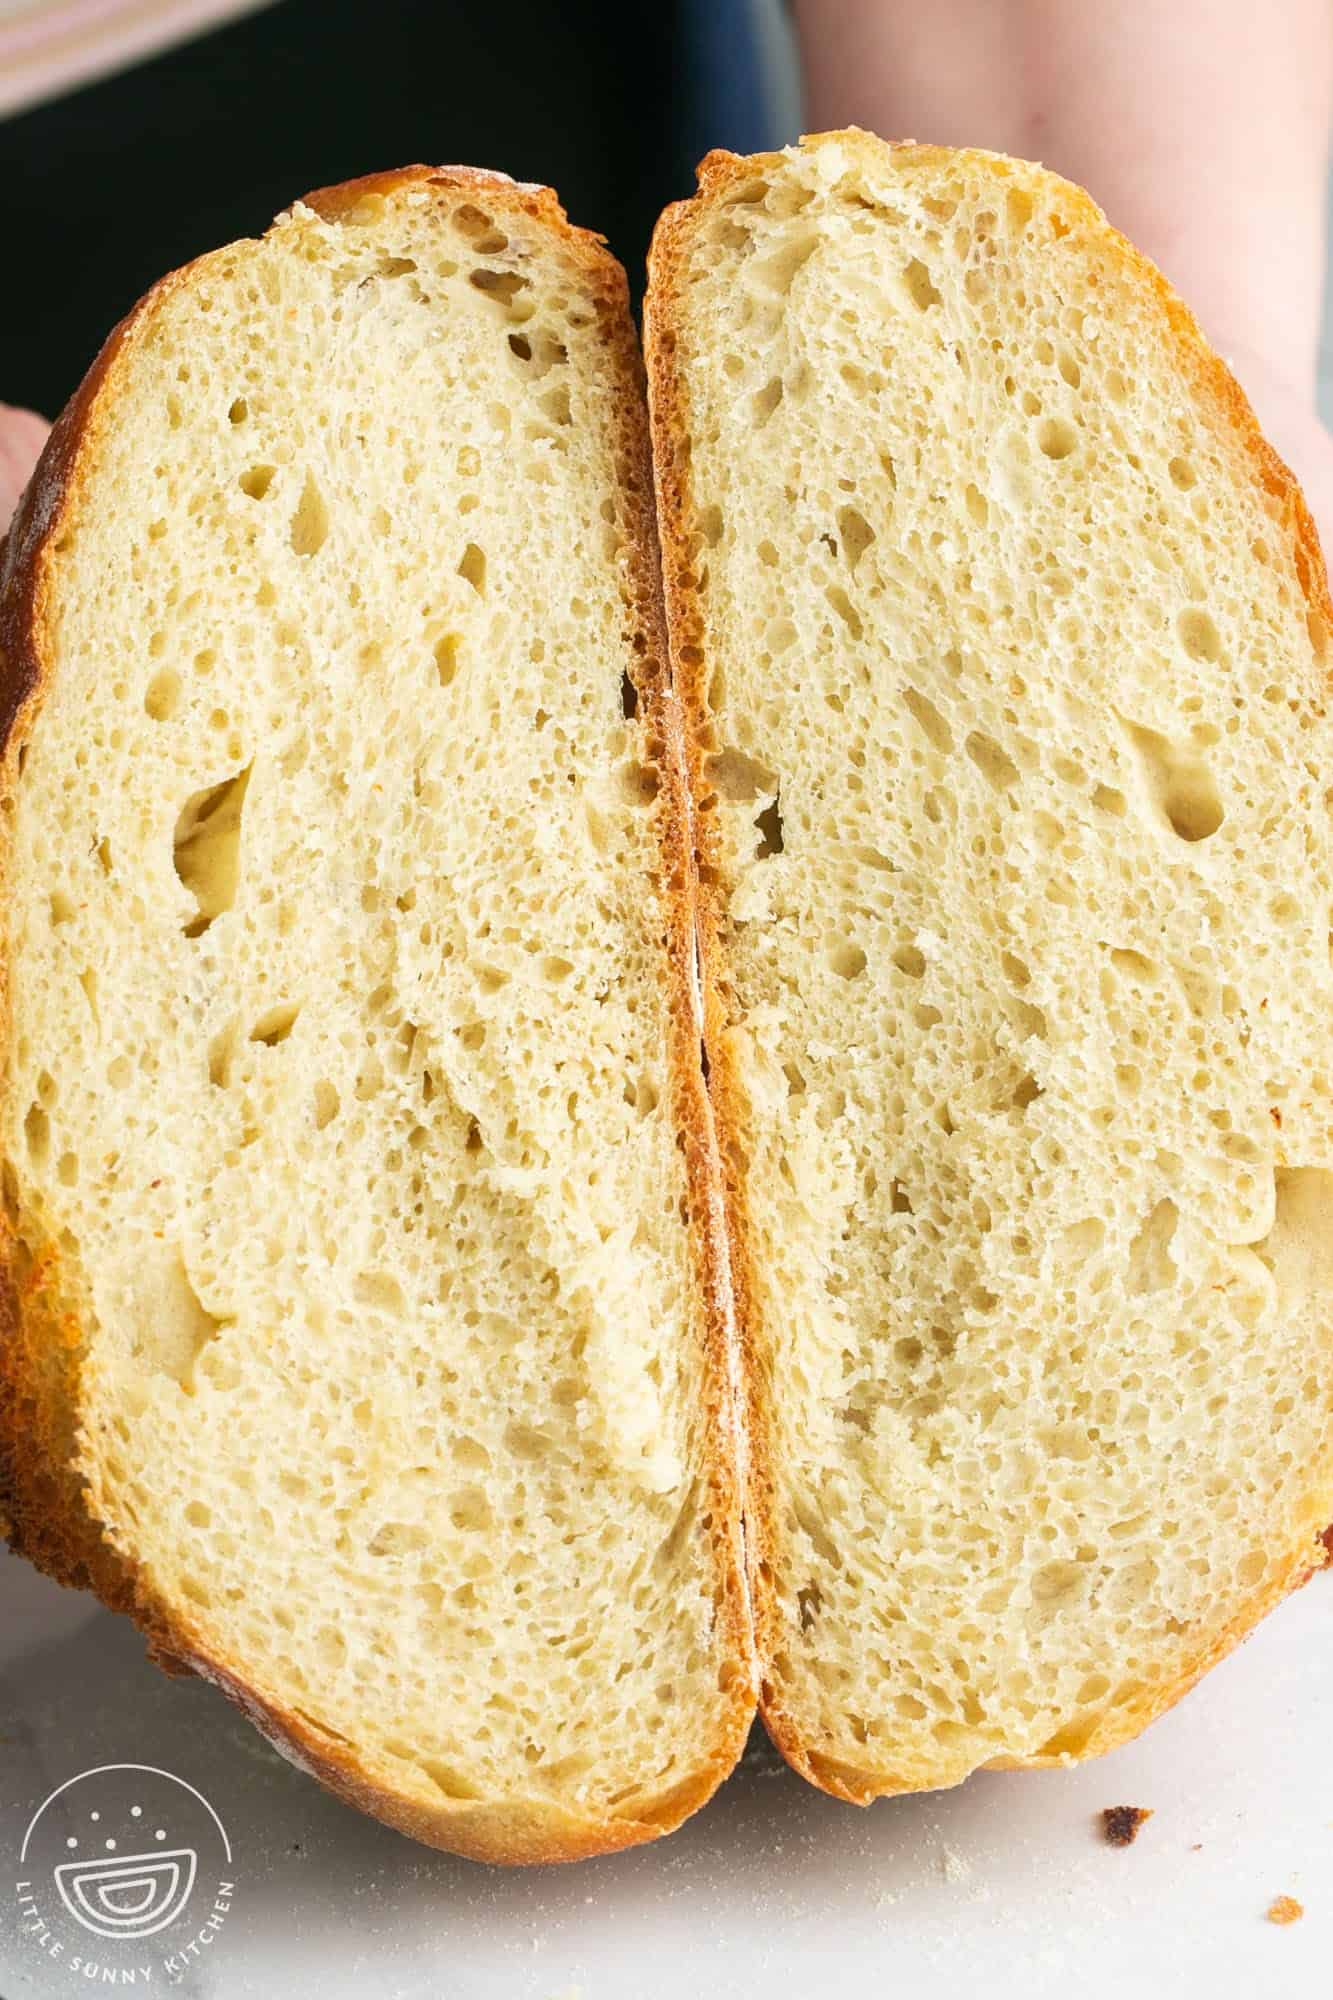 a round loaf of no knead bread, sliced in half to show the crumb.